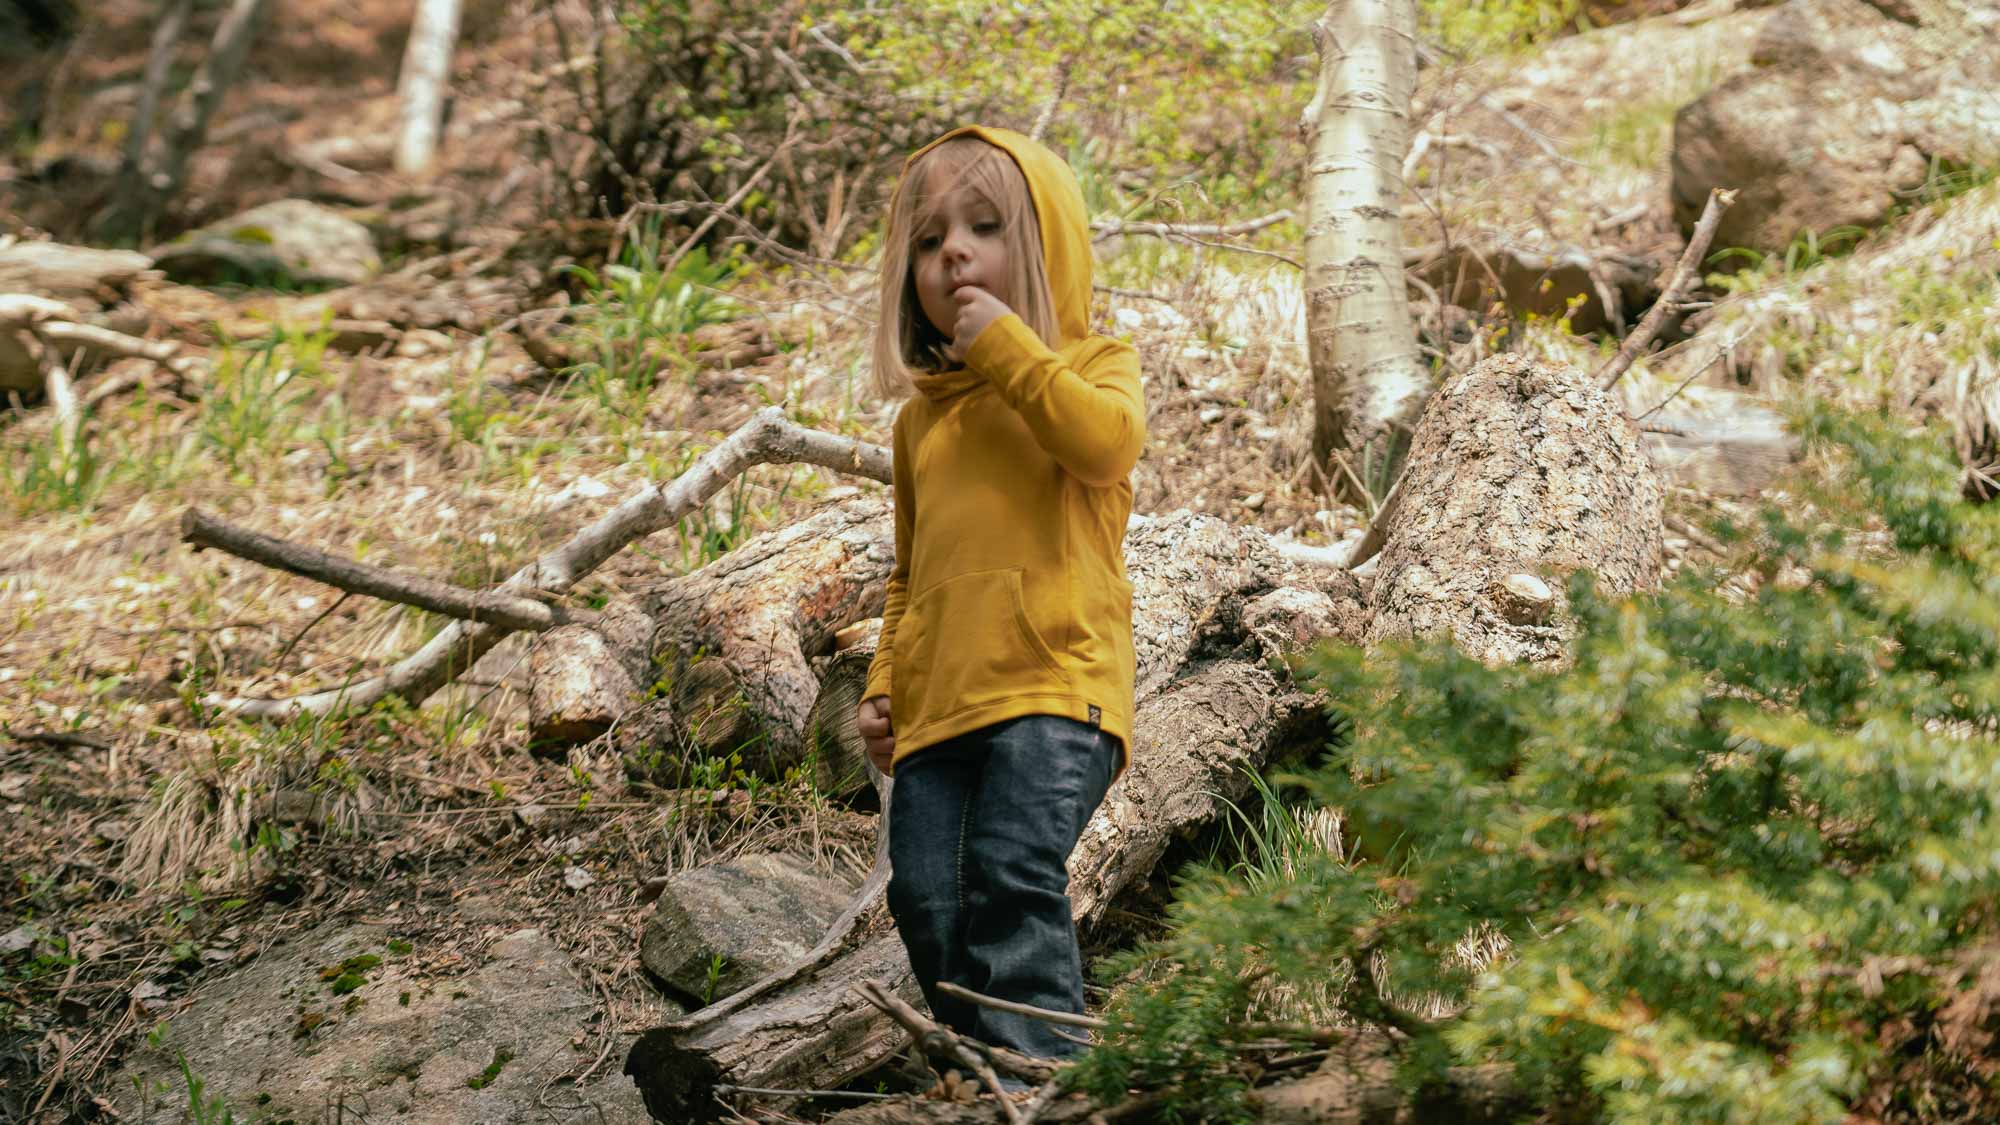 Protection from the Sun for toddler chaser hoodie for outdoor adventures